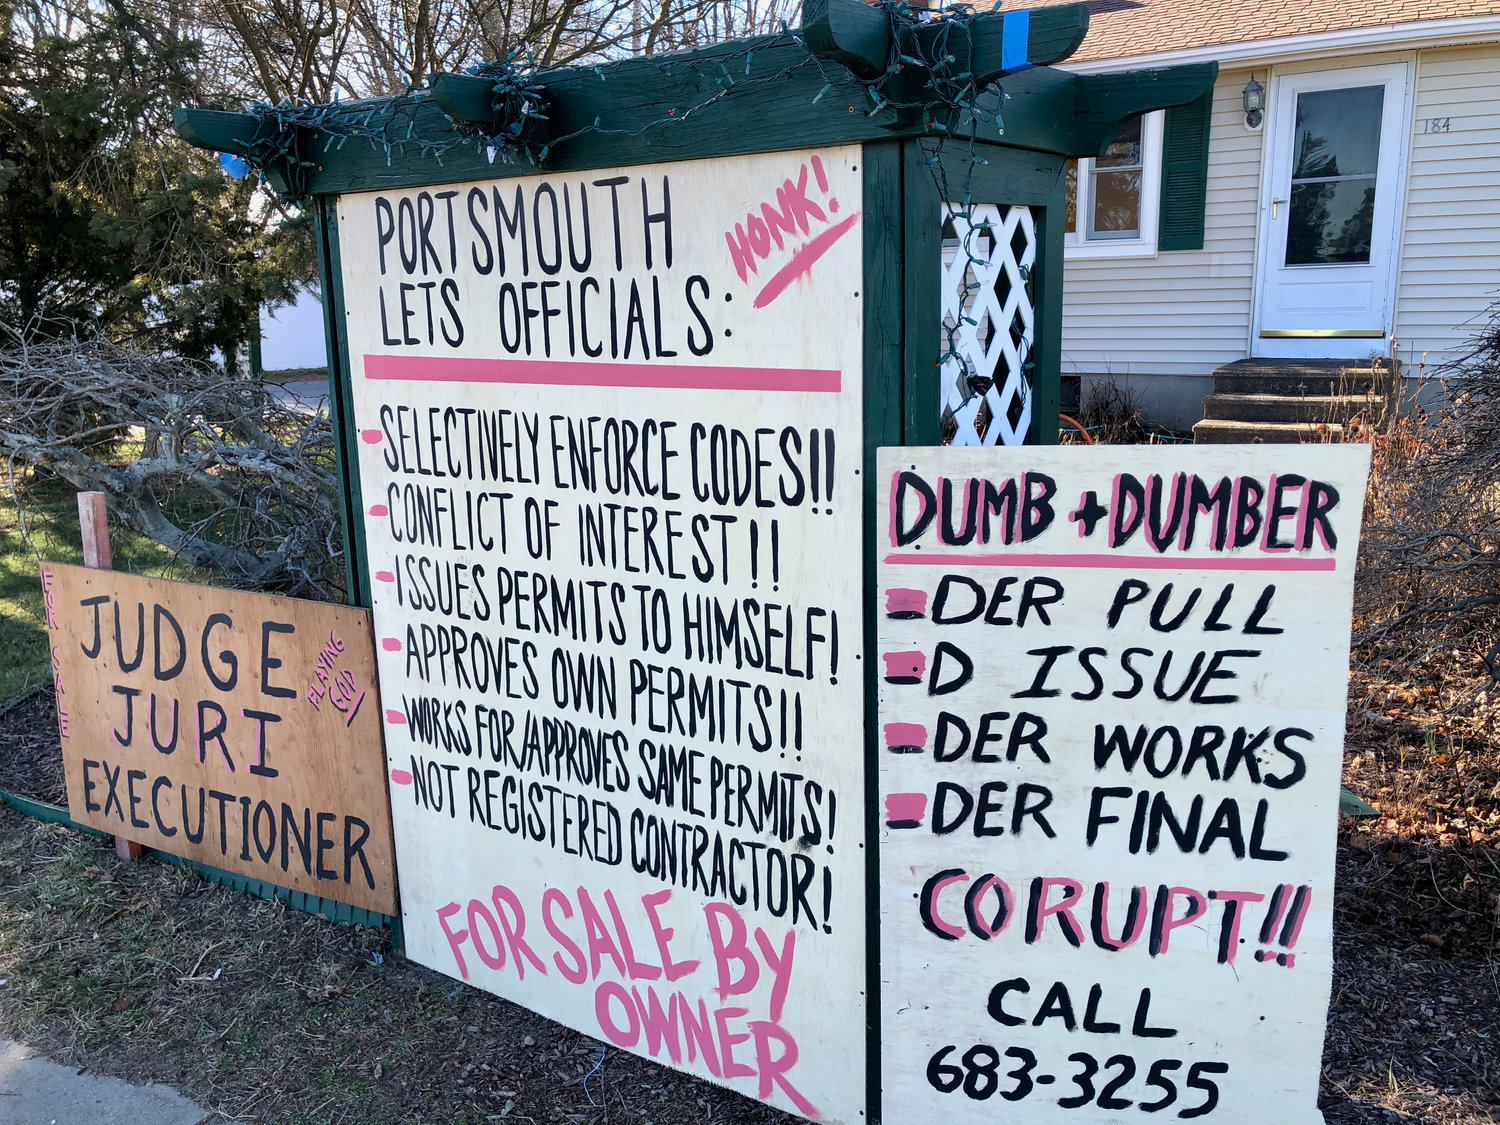 Examples of signs that were erected in front of 184 Bristol Ferry Road by local resident Michael DiPaola, and which were the target of a notice of violation from the Town of Portsmouth. The signs were taken down while the case was being litigated.